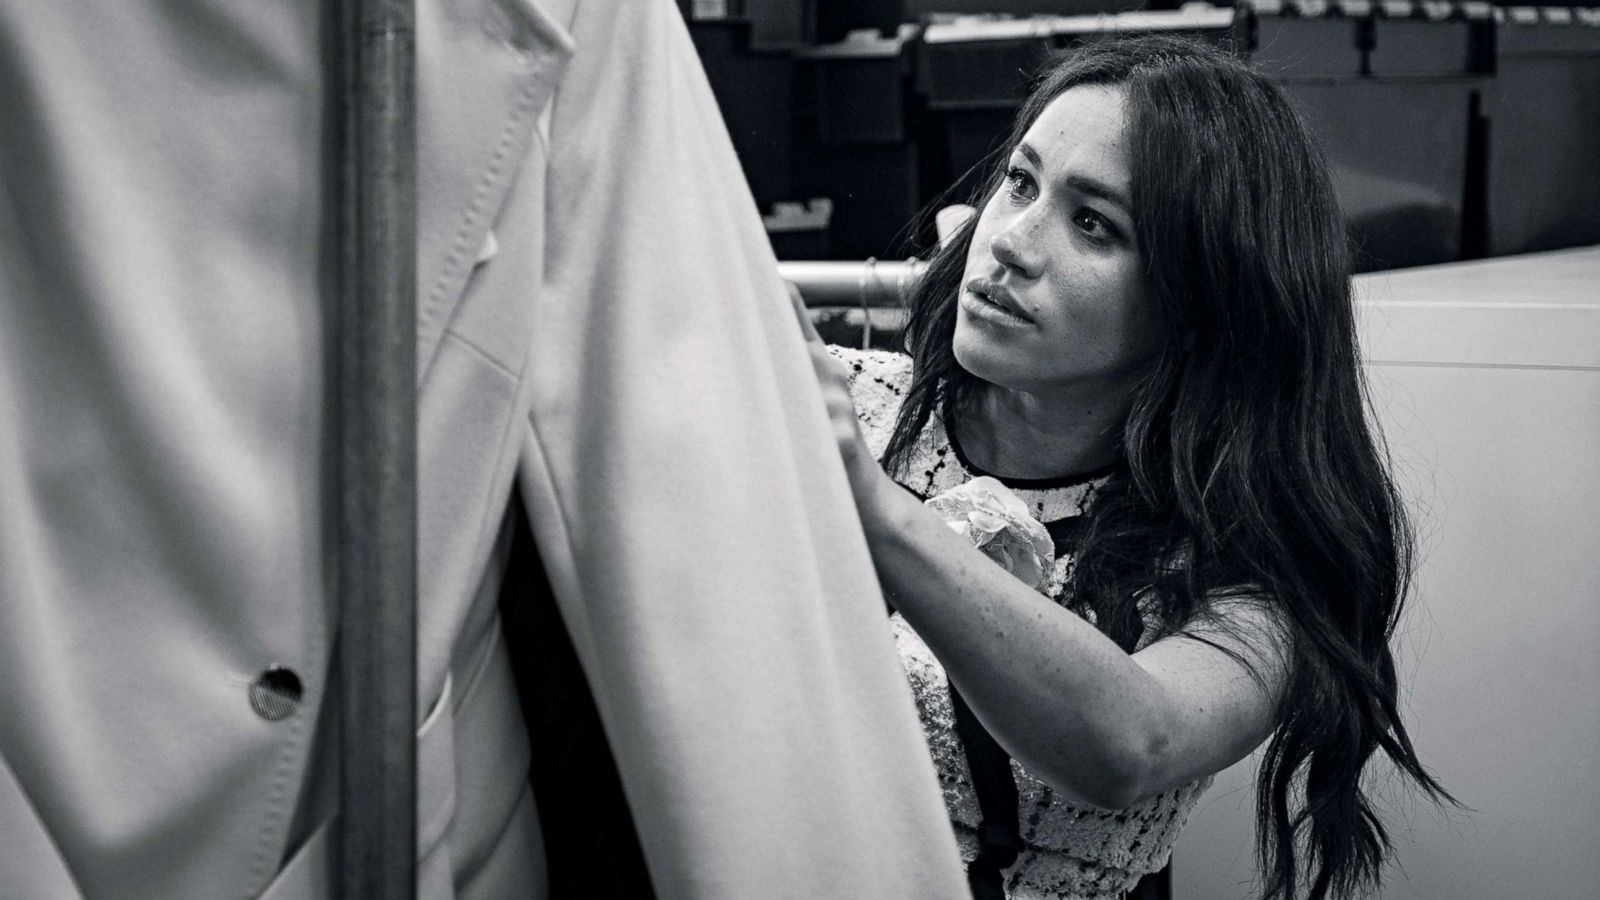 PHOTO: Meghan, Duchess of Sussex, patron of Smart Works, is pictured in the workroom of the Smart Works, London office in this undated handout image released by Kensington Palace, July 28, 2019.